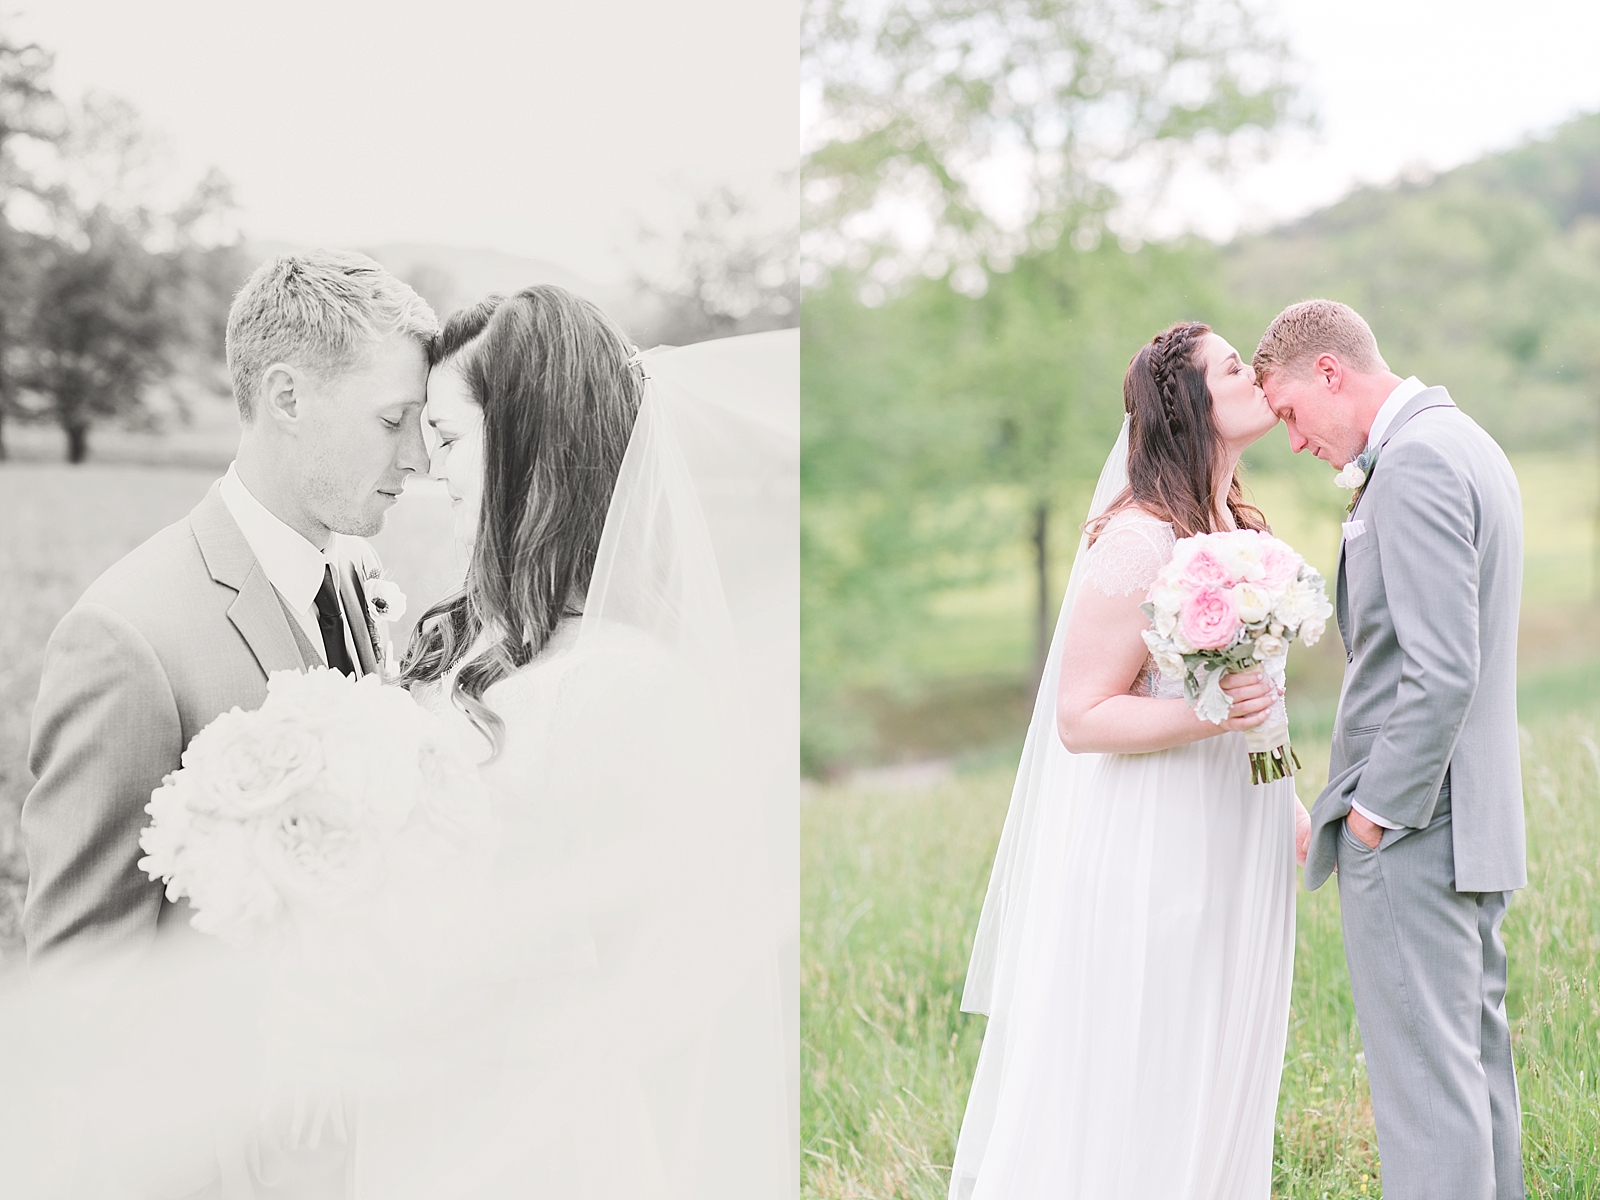 McGuire's Millrace Farm Wedding Bride and Groom Black and White Veil photo and Bride Kissing Groom Photos